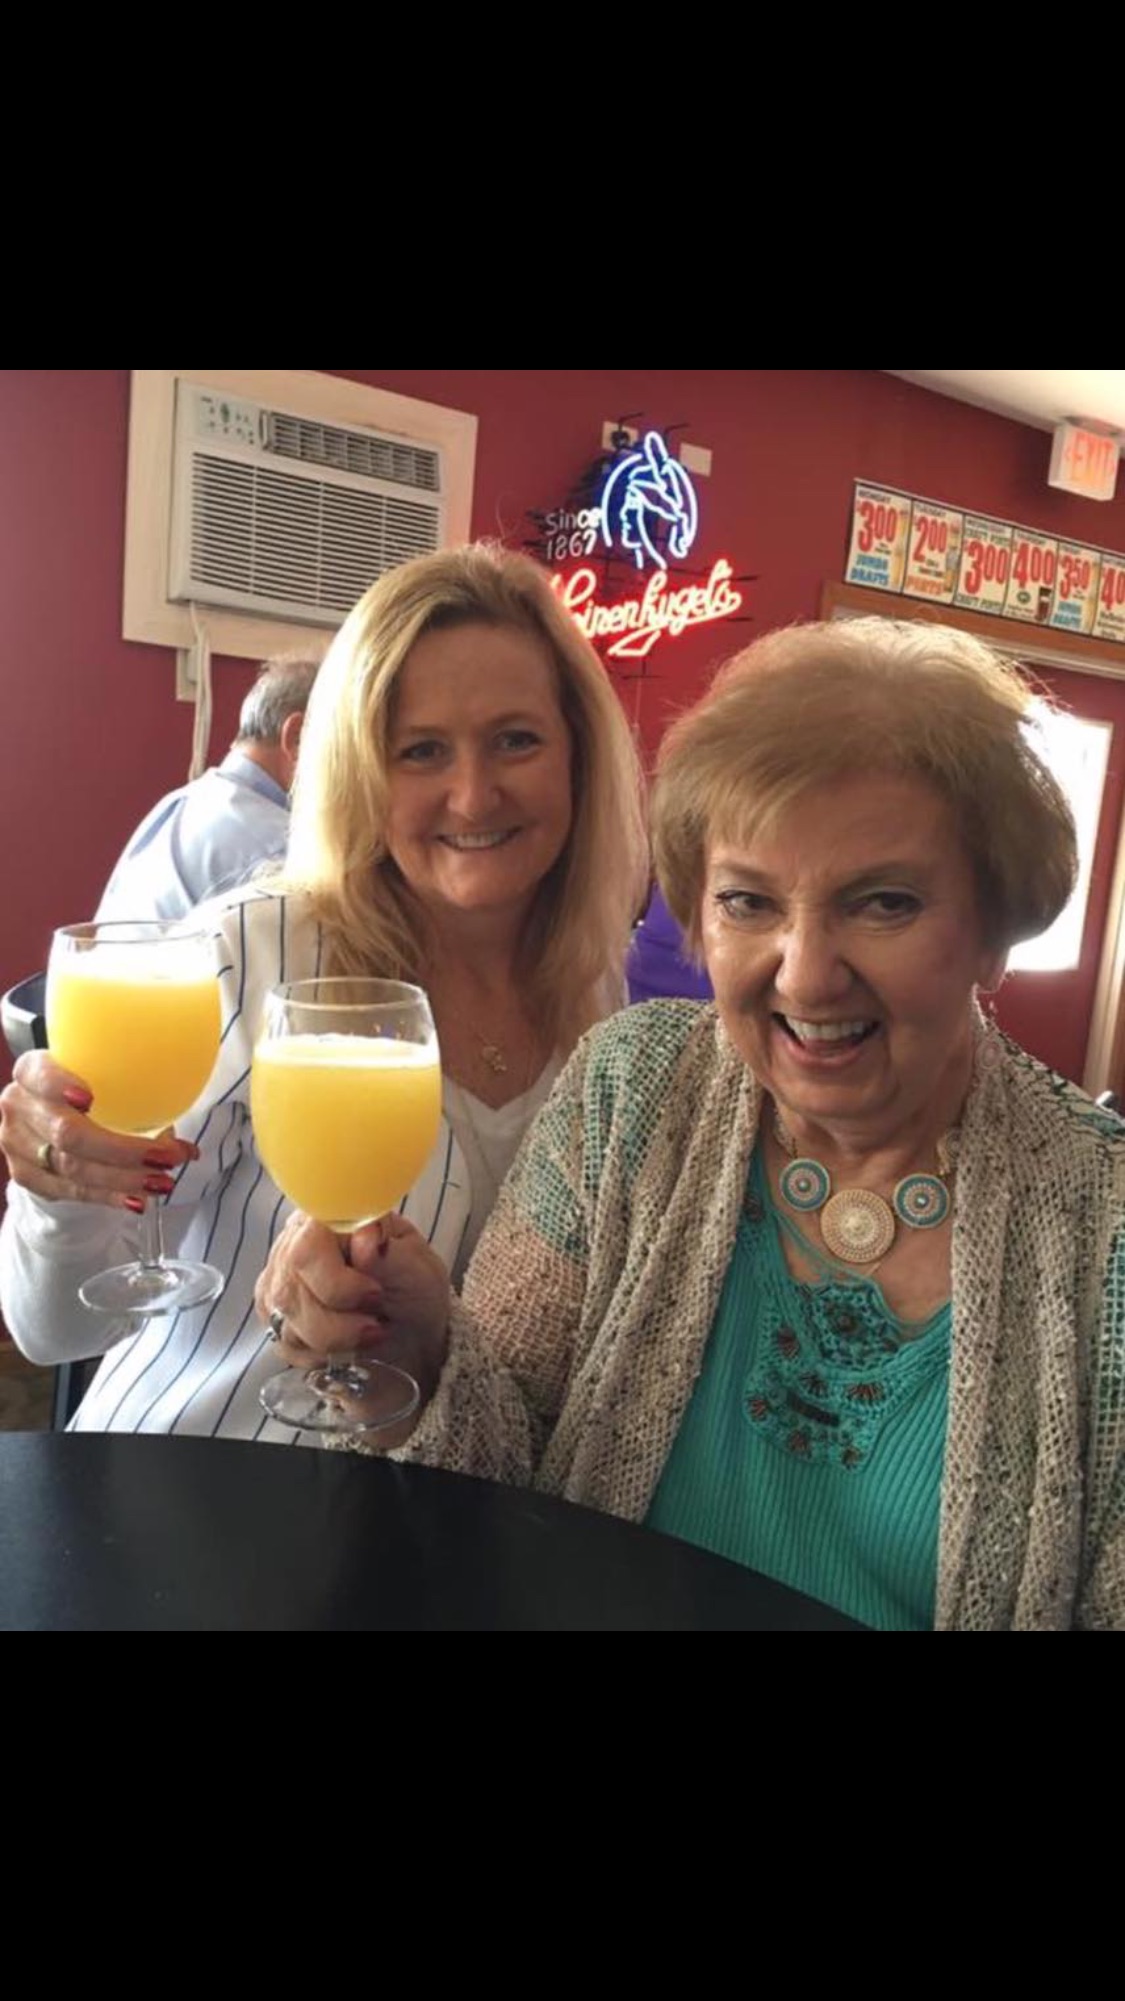 Enjoying mimosas during our trip to Chicago 2016. <br />
Love you Sandy!!